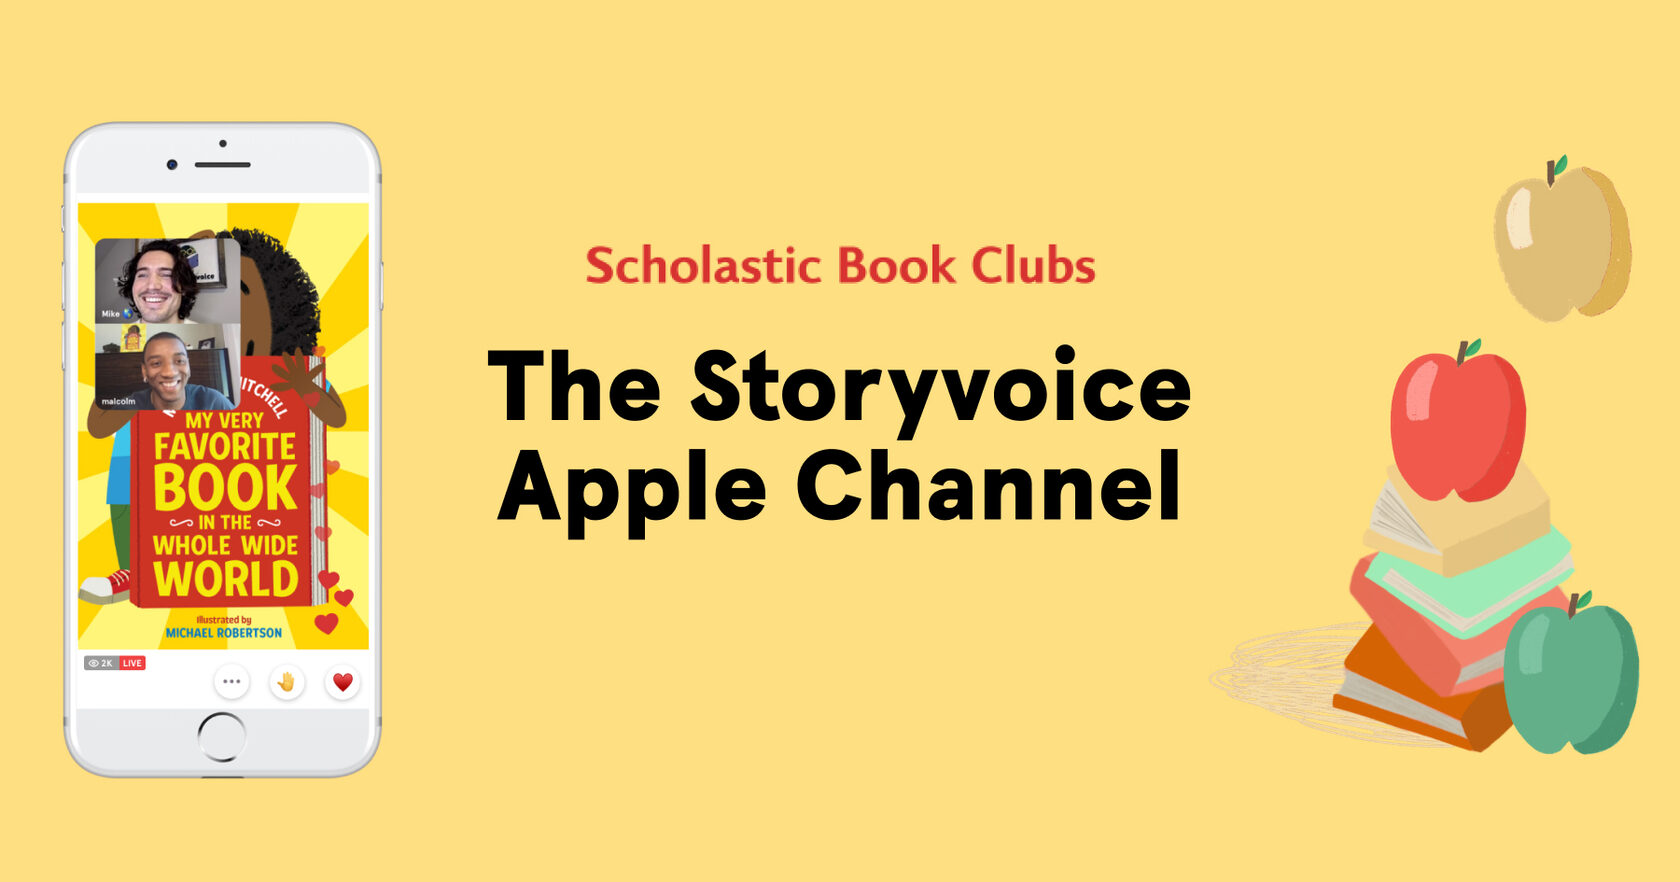 Storyvoice Apple Channel